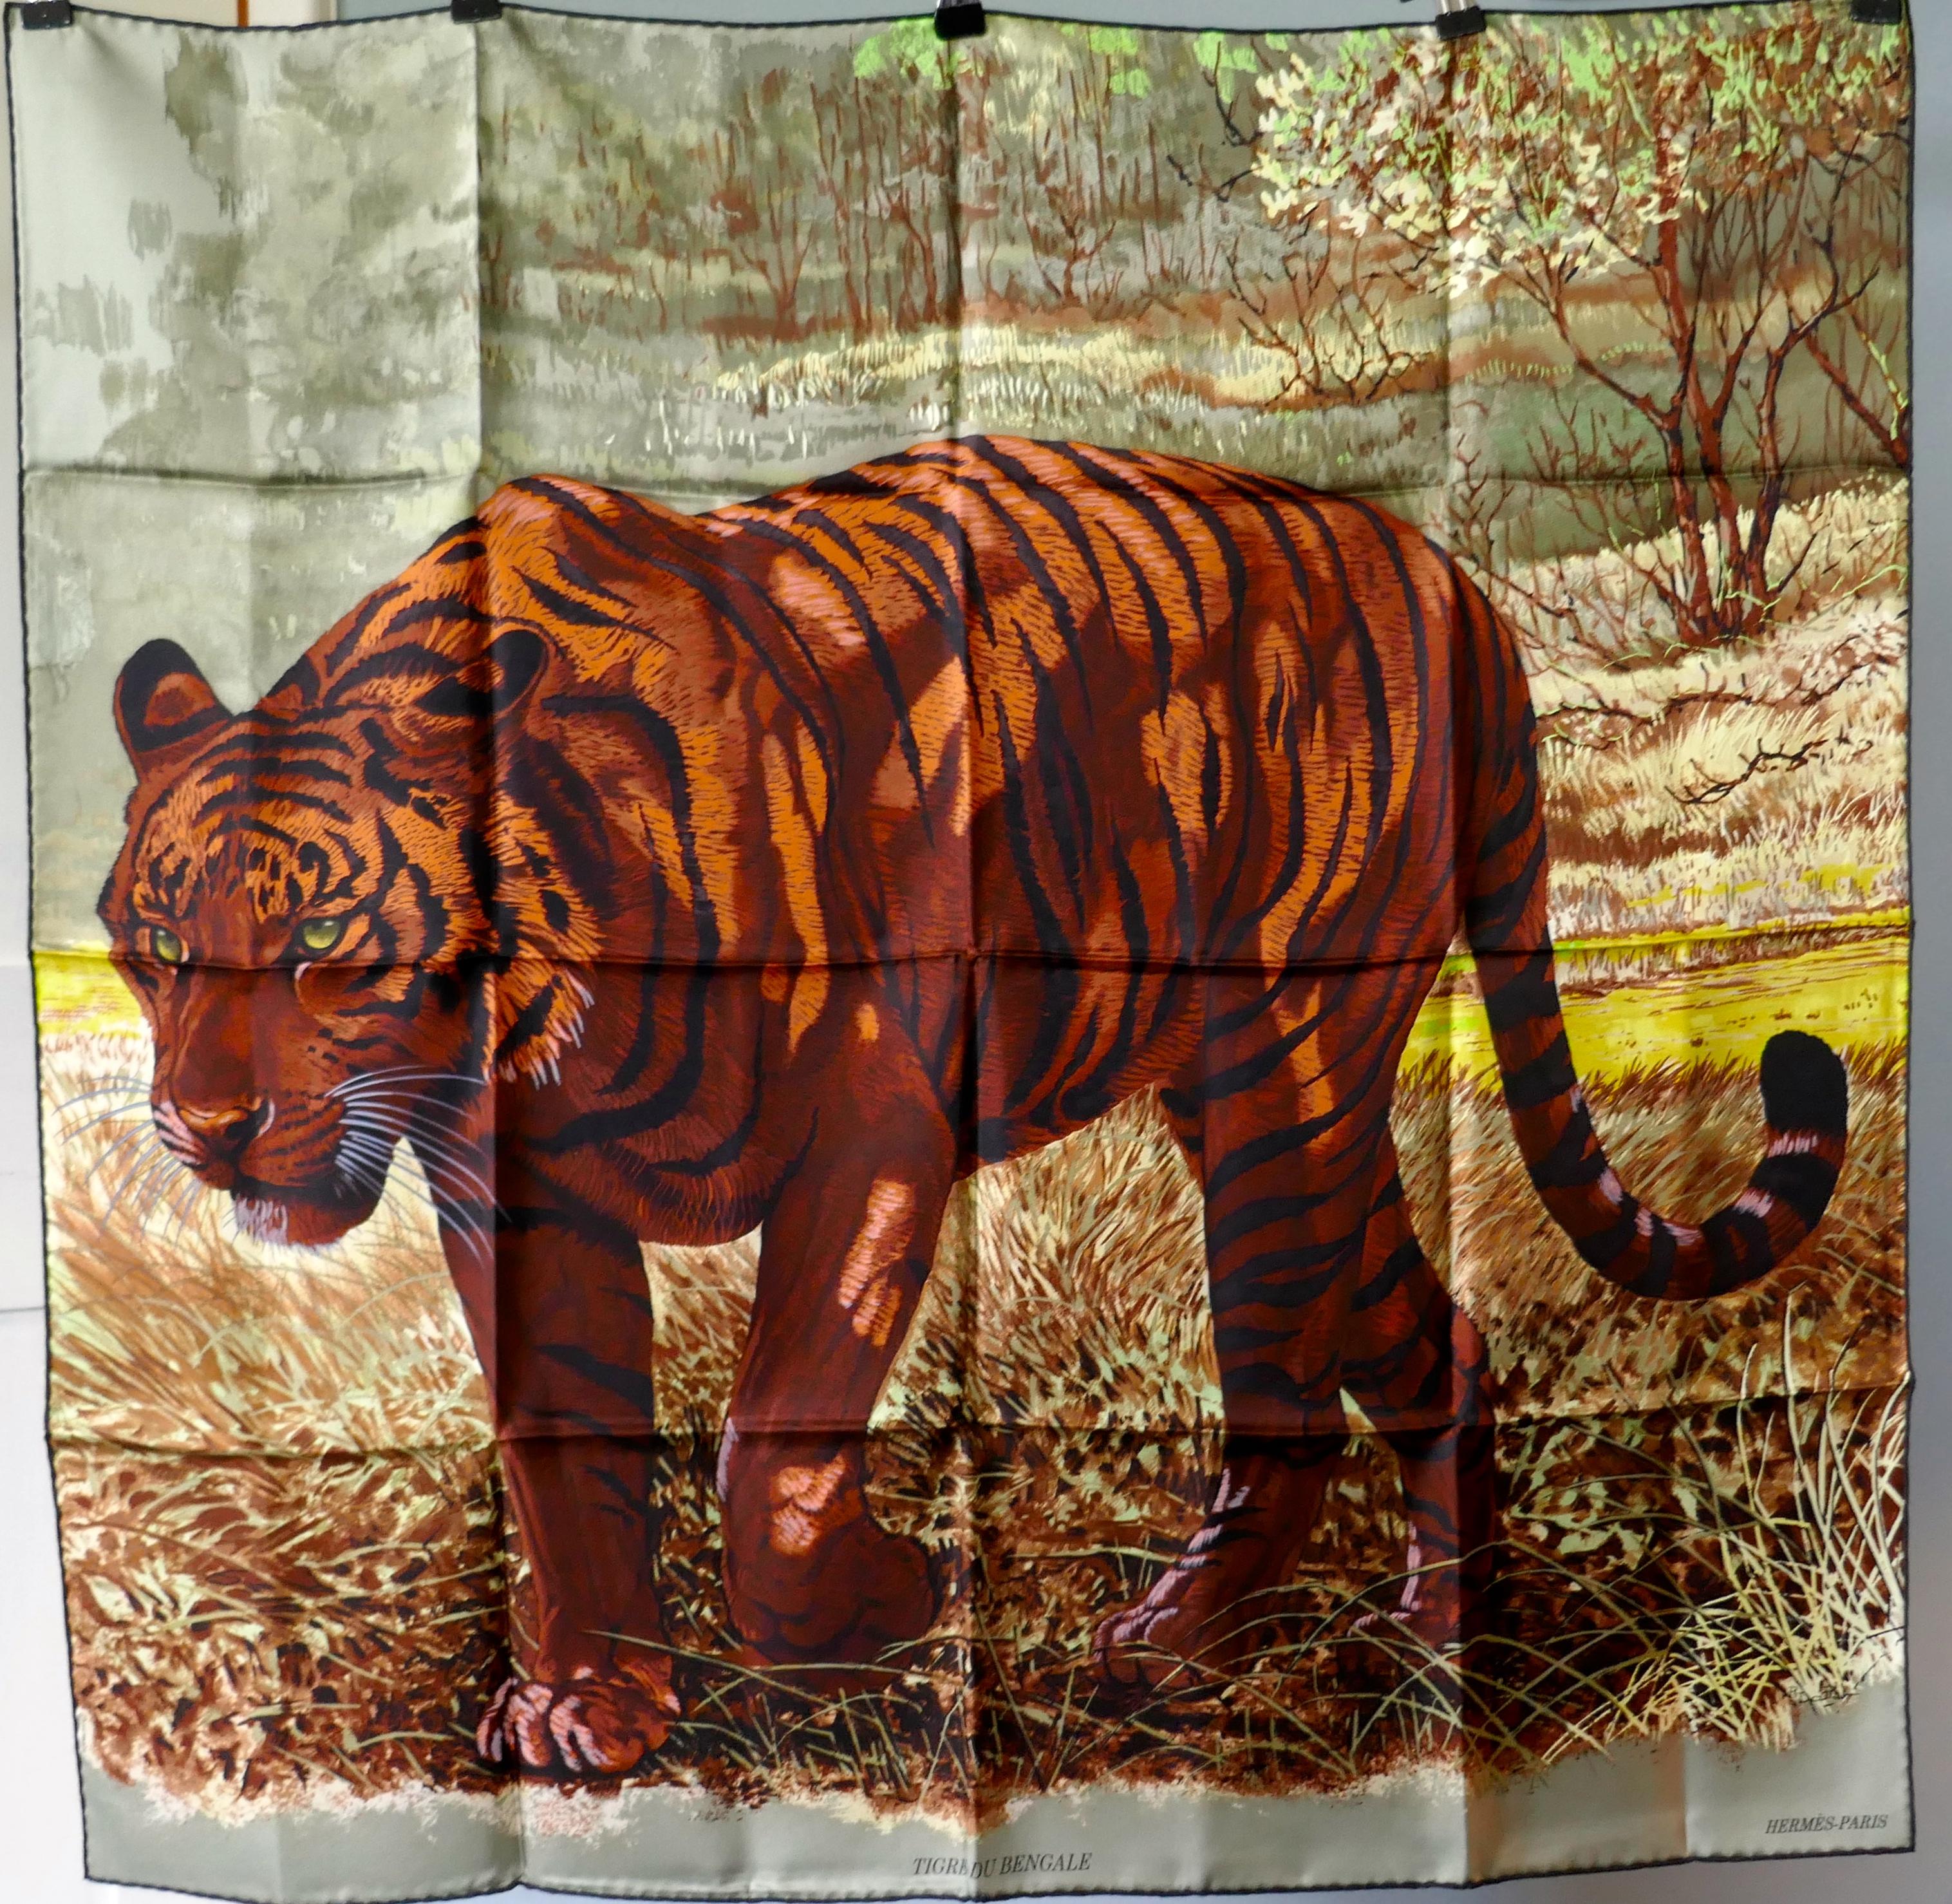 Very Rare Hermes Silk Scarf “Le Tigre du Benagale” by Robert Dallet

Beautiful unworn 100% Silk Hermes Scarf  “Le Tigre du Benagale”  by by Robert Dallet
This is an exquisite and stunning Grey and Red Ochre Colourway, one for the collector, portrait